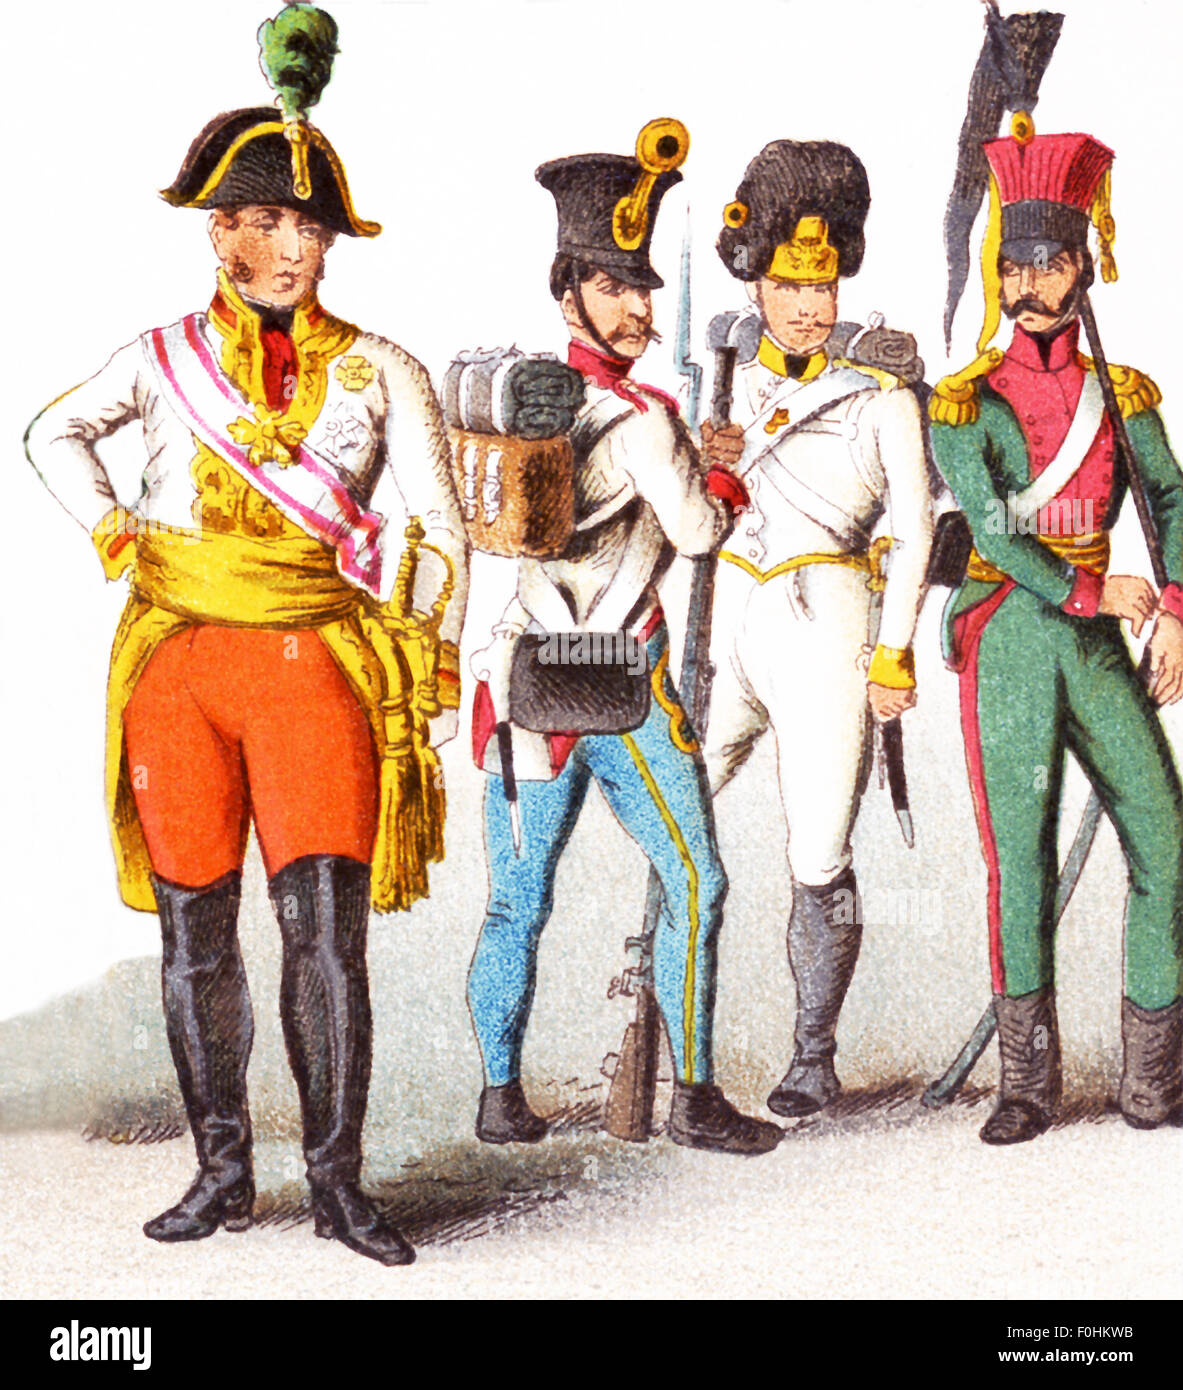 The figures pictured here represent Austrian military. From left to right, they are:   Austrian Field Marshal 1809, Austro-Hungarian infantry 1815,  Austrian Grenadier 1813,  Austrian Uhlan 1809. The illustration dates to 1882. Stock Photo